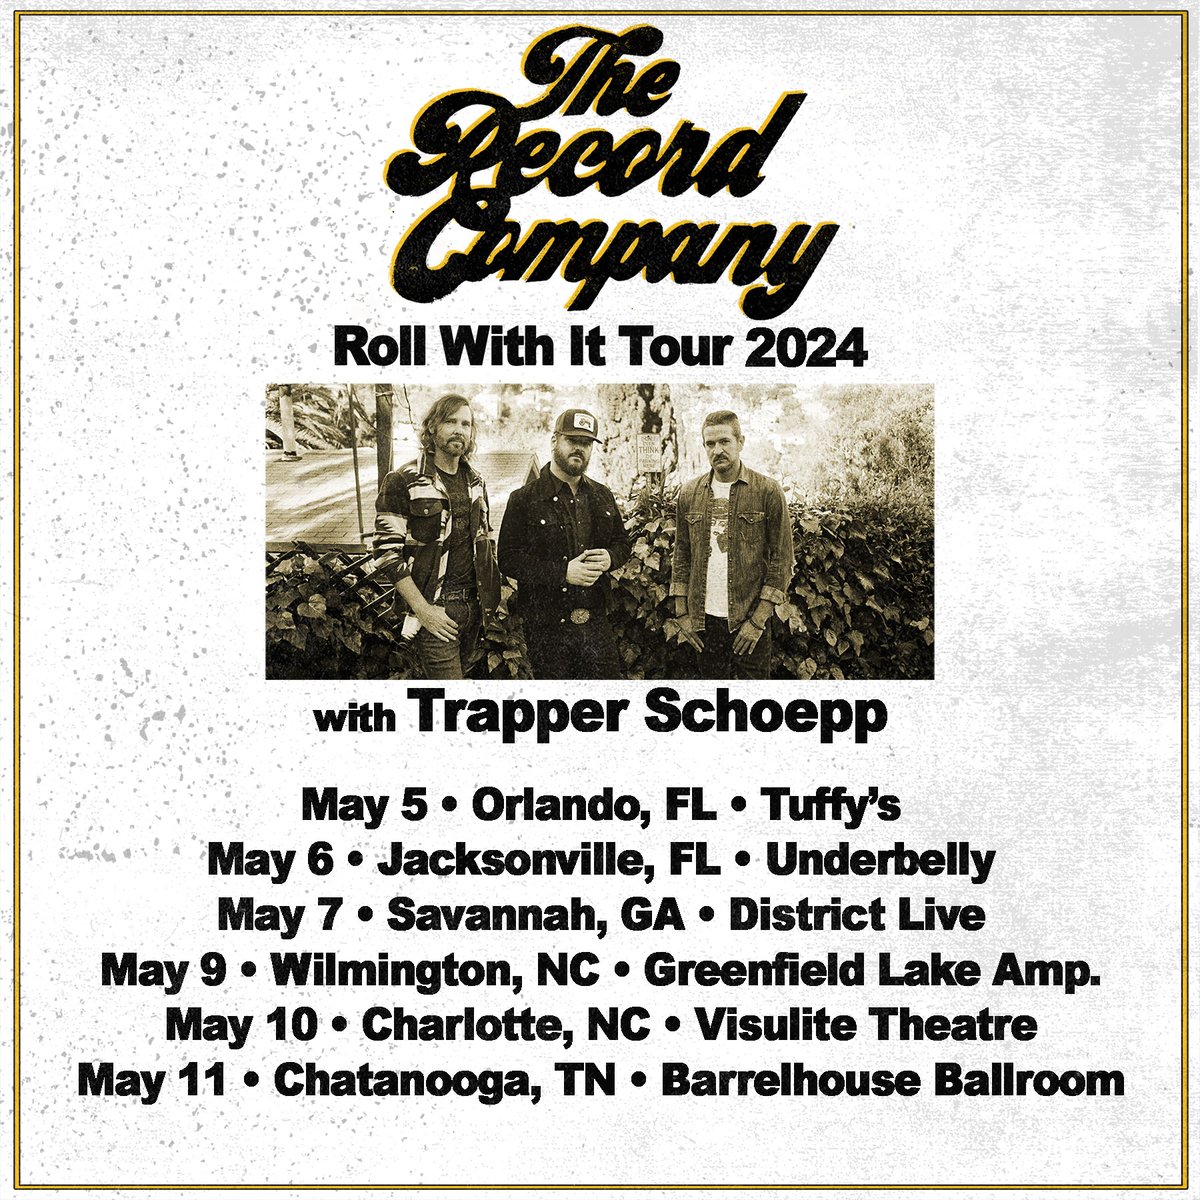 We are happy to announce that @trapperschoepp will be opening for us on our upcoming May headline dates. Find ticket links for these shows at TheRecordCompany.net/tour